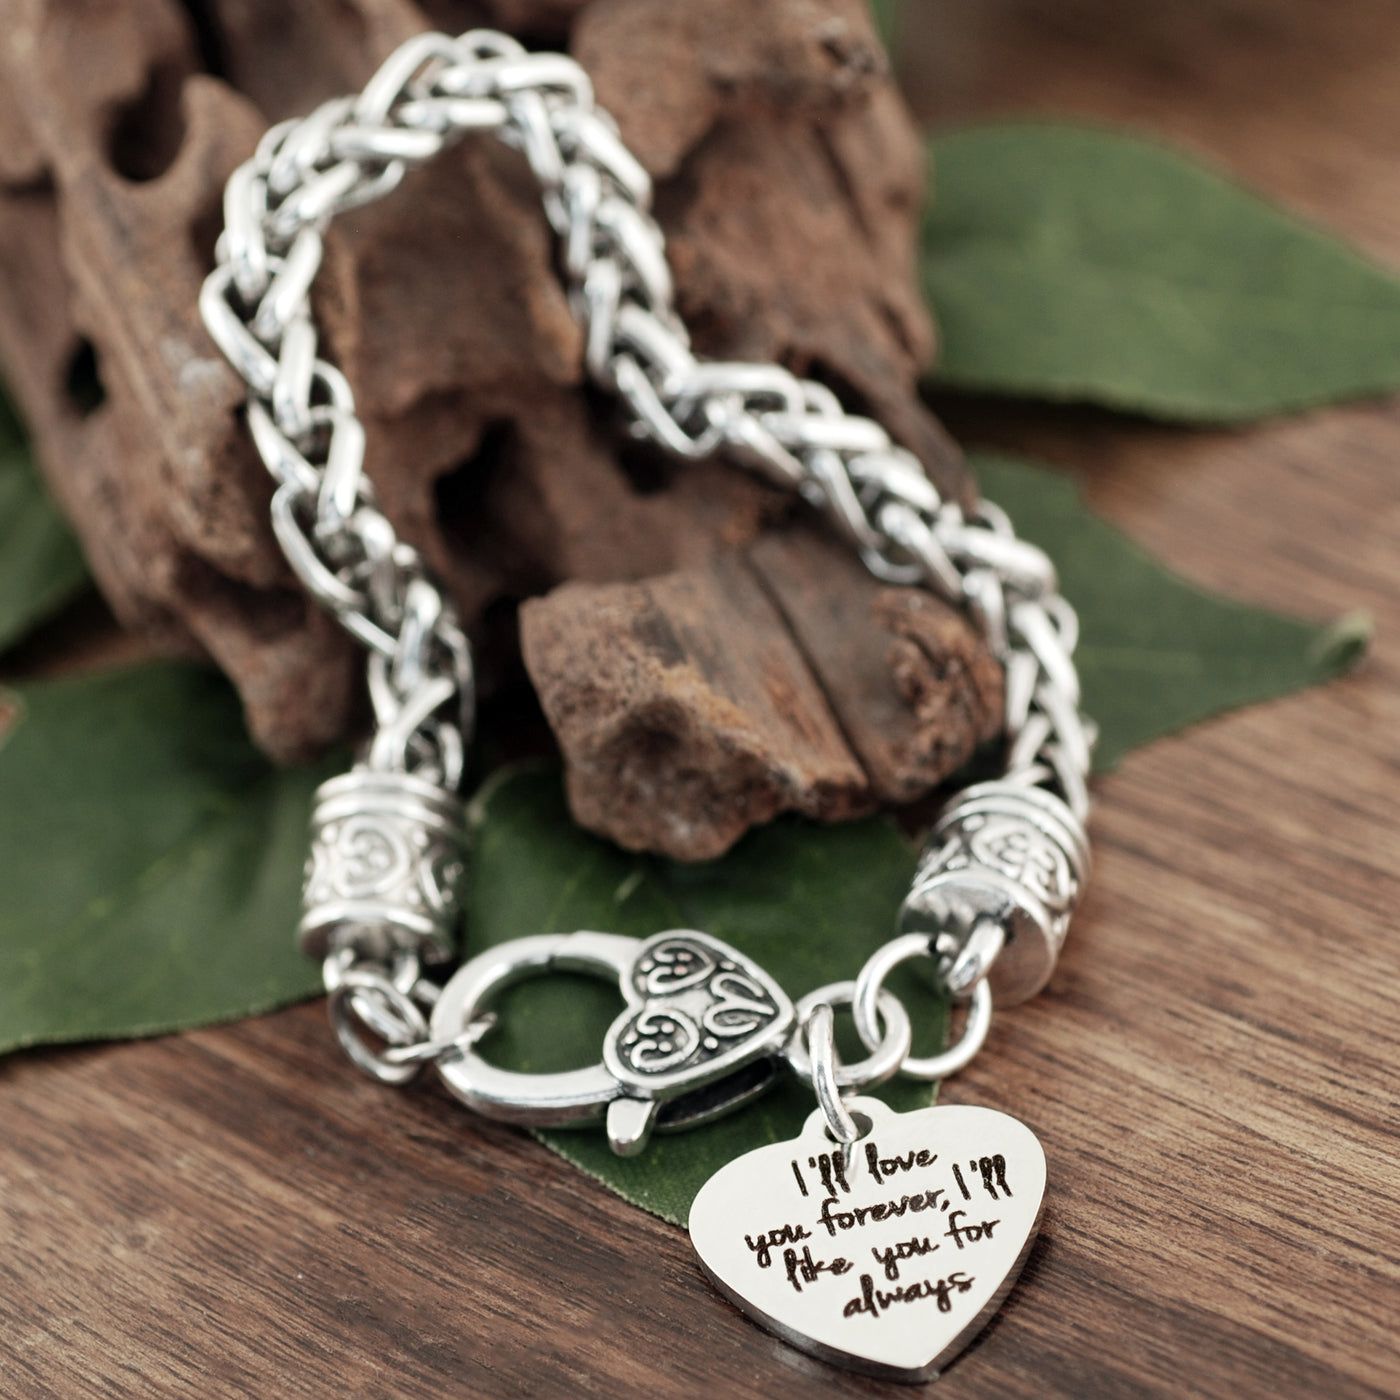 As long as I'm living my Mommy you'll be Antique Silver Bracelet